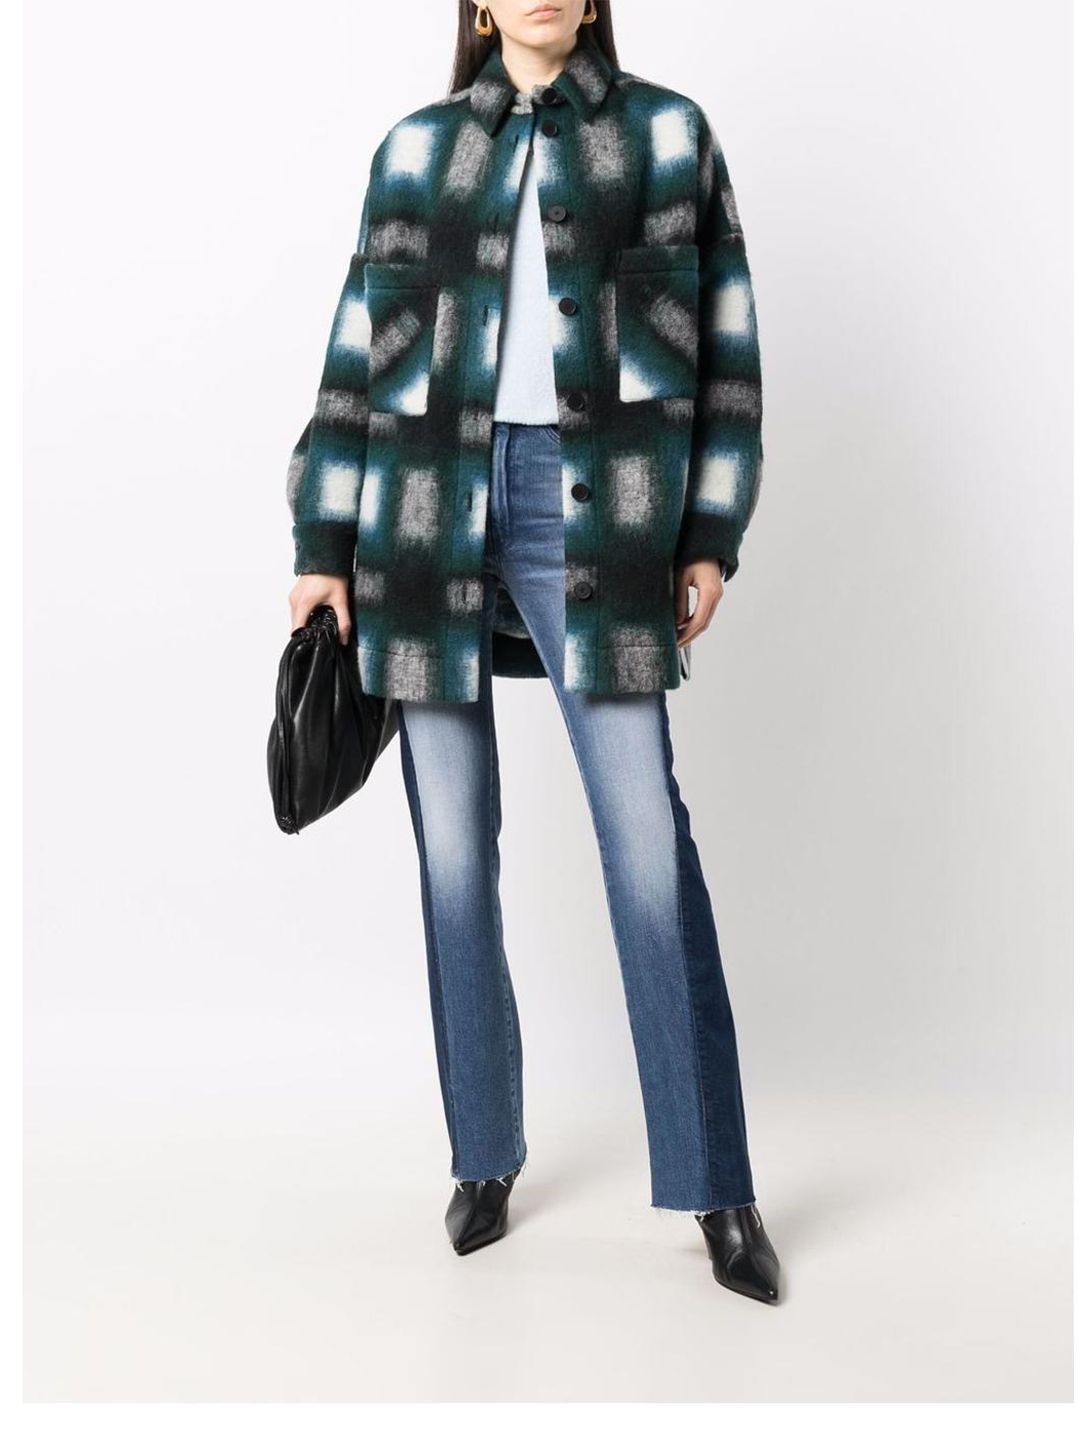 Multicolor Oversized Front Pockets Wool Plaid Flannel Over Shirt Shacket Jacket